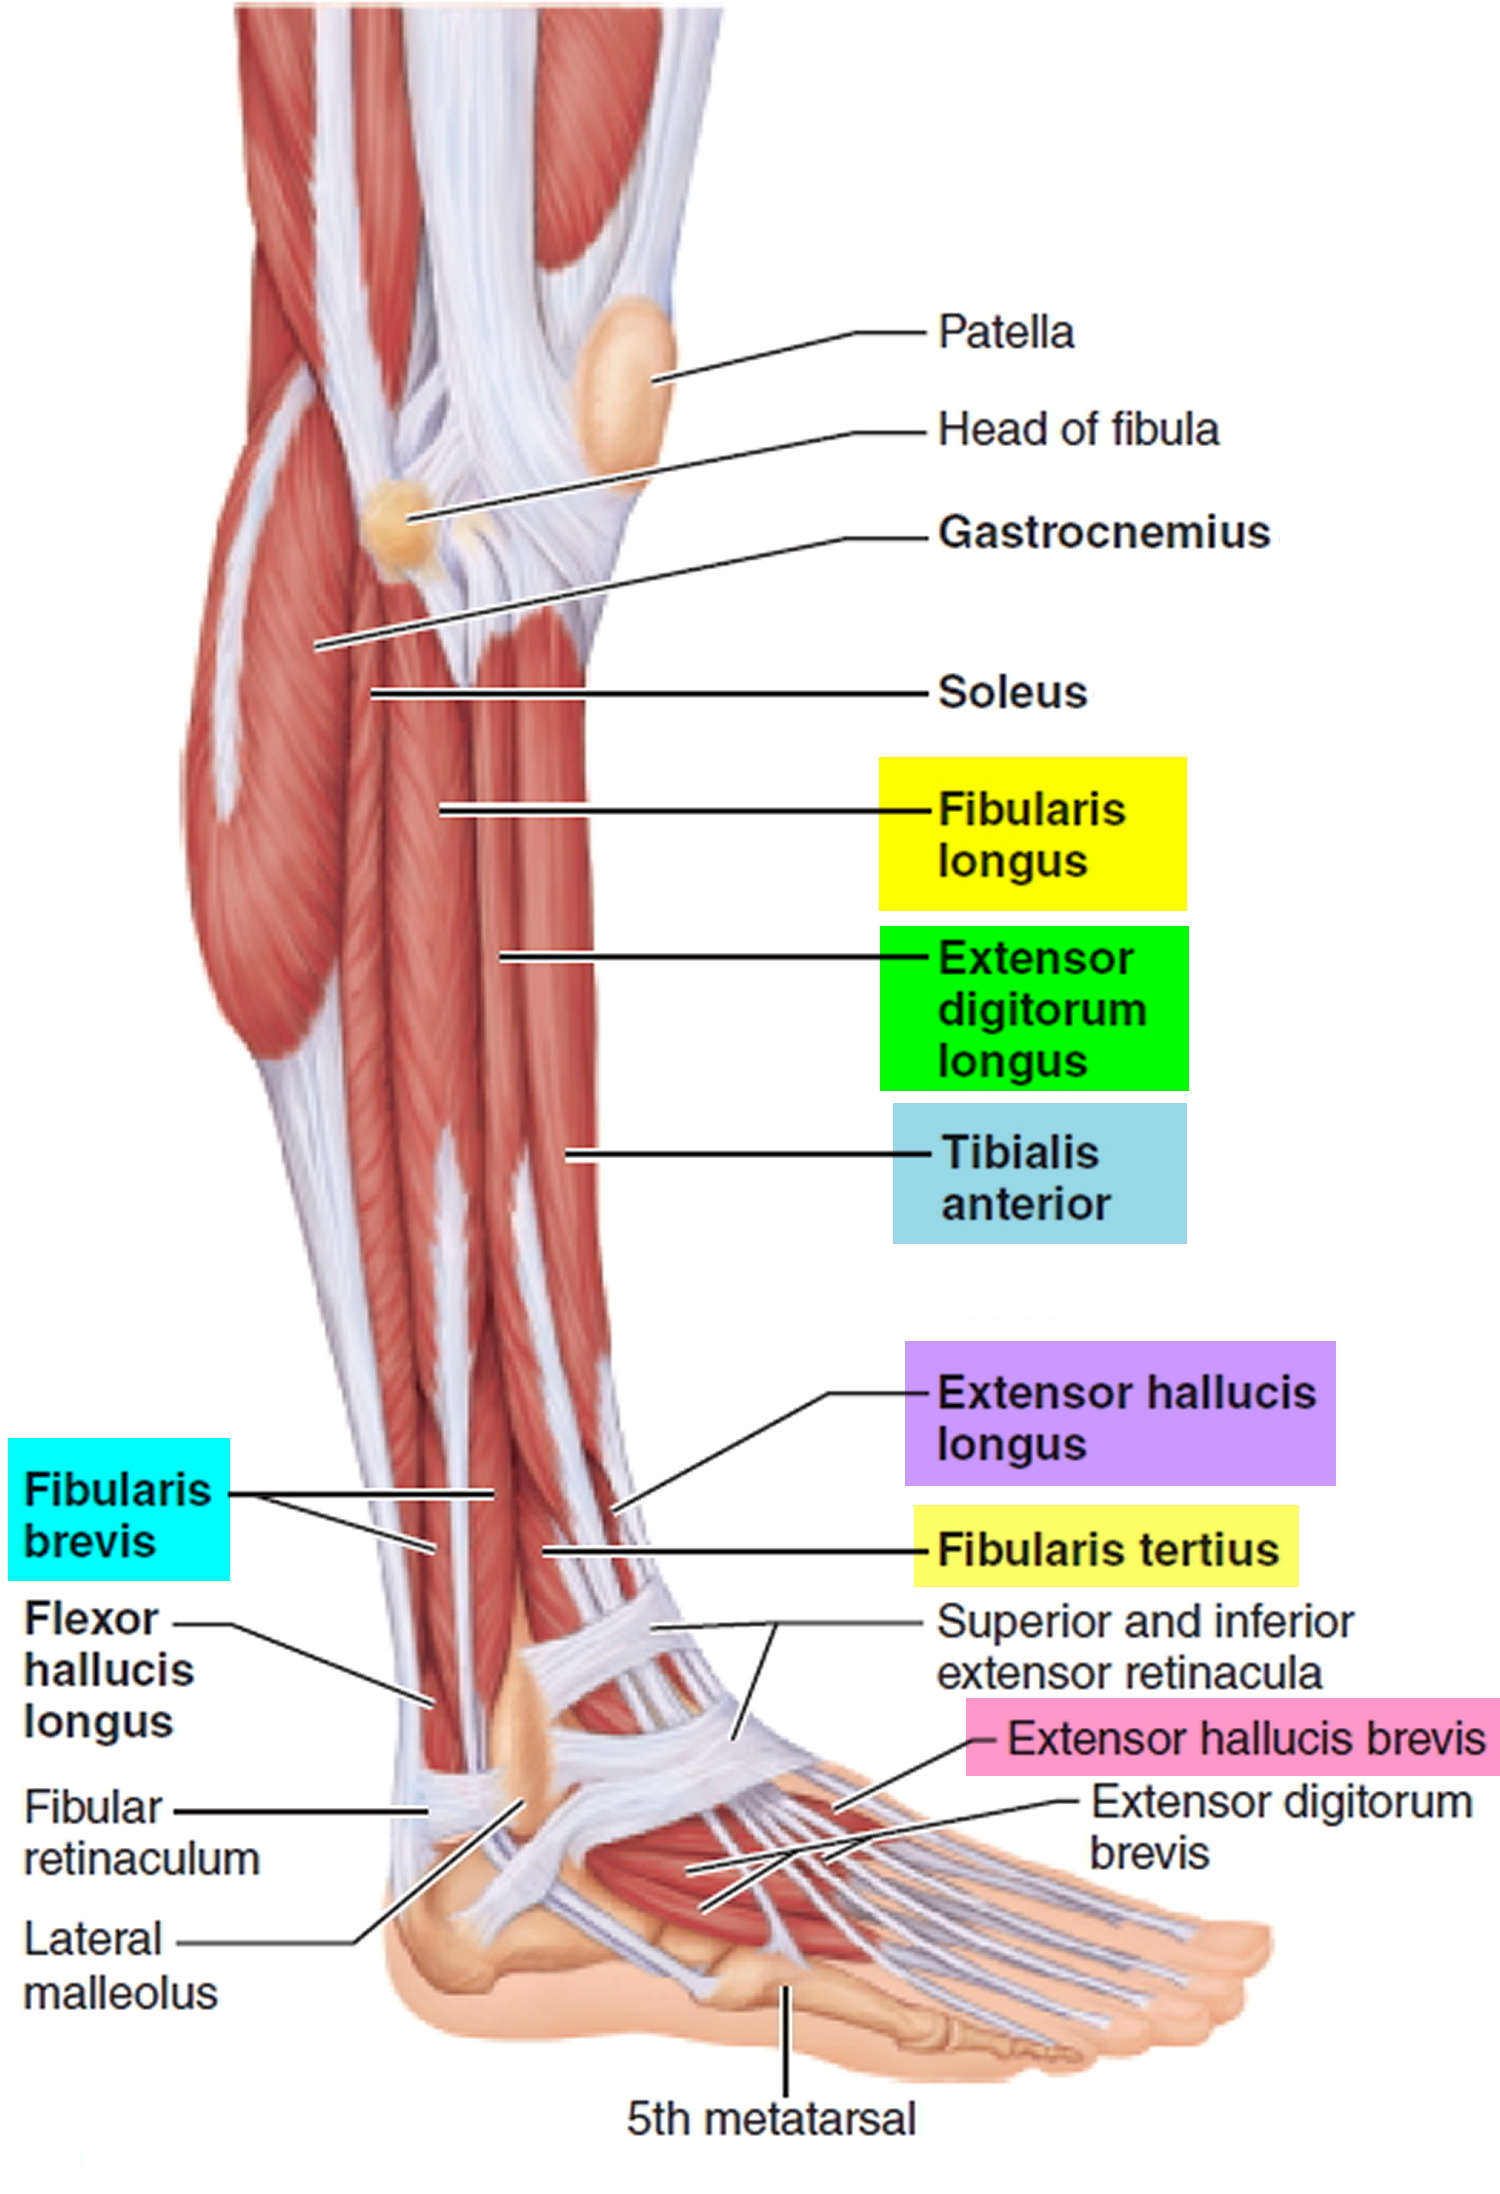 lateral-leg-compartment-muscles.jpg